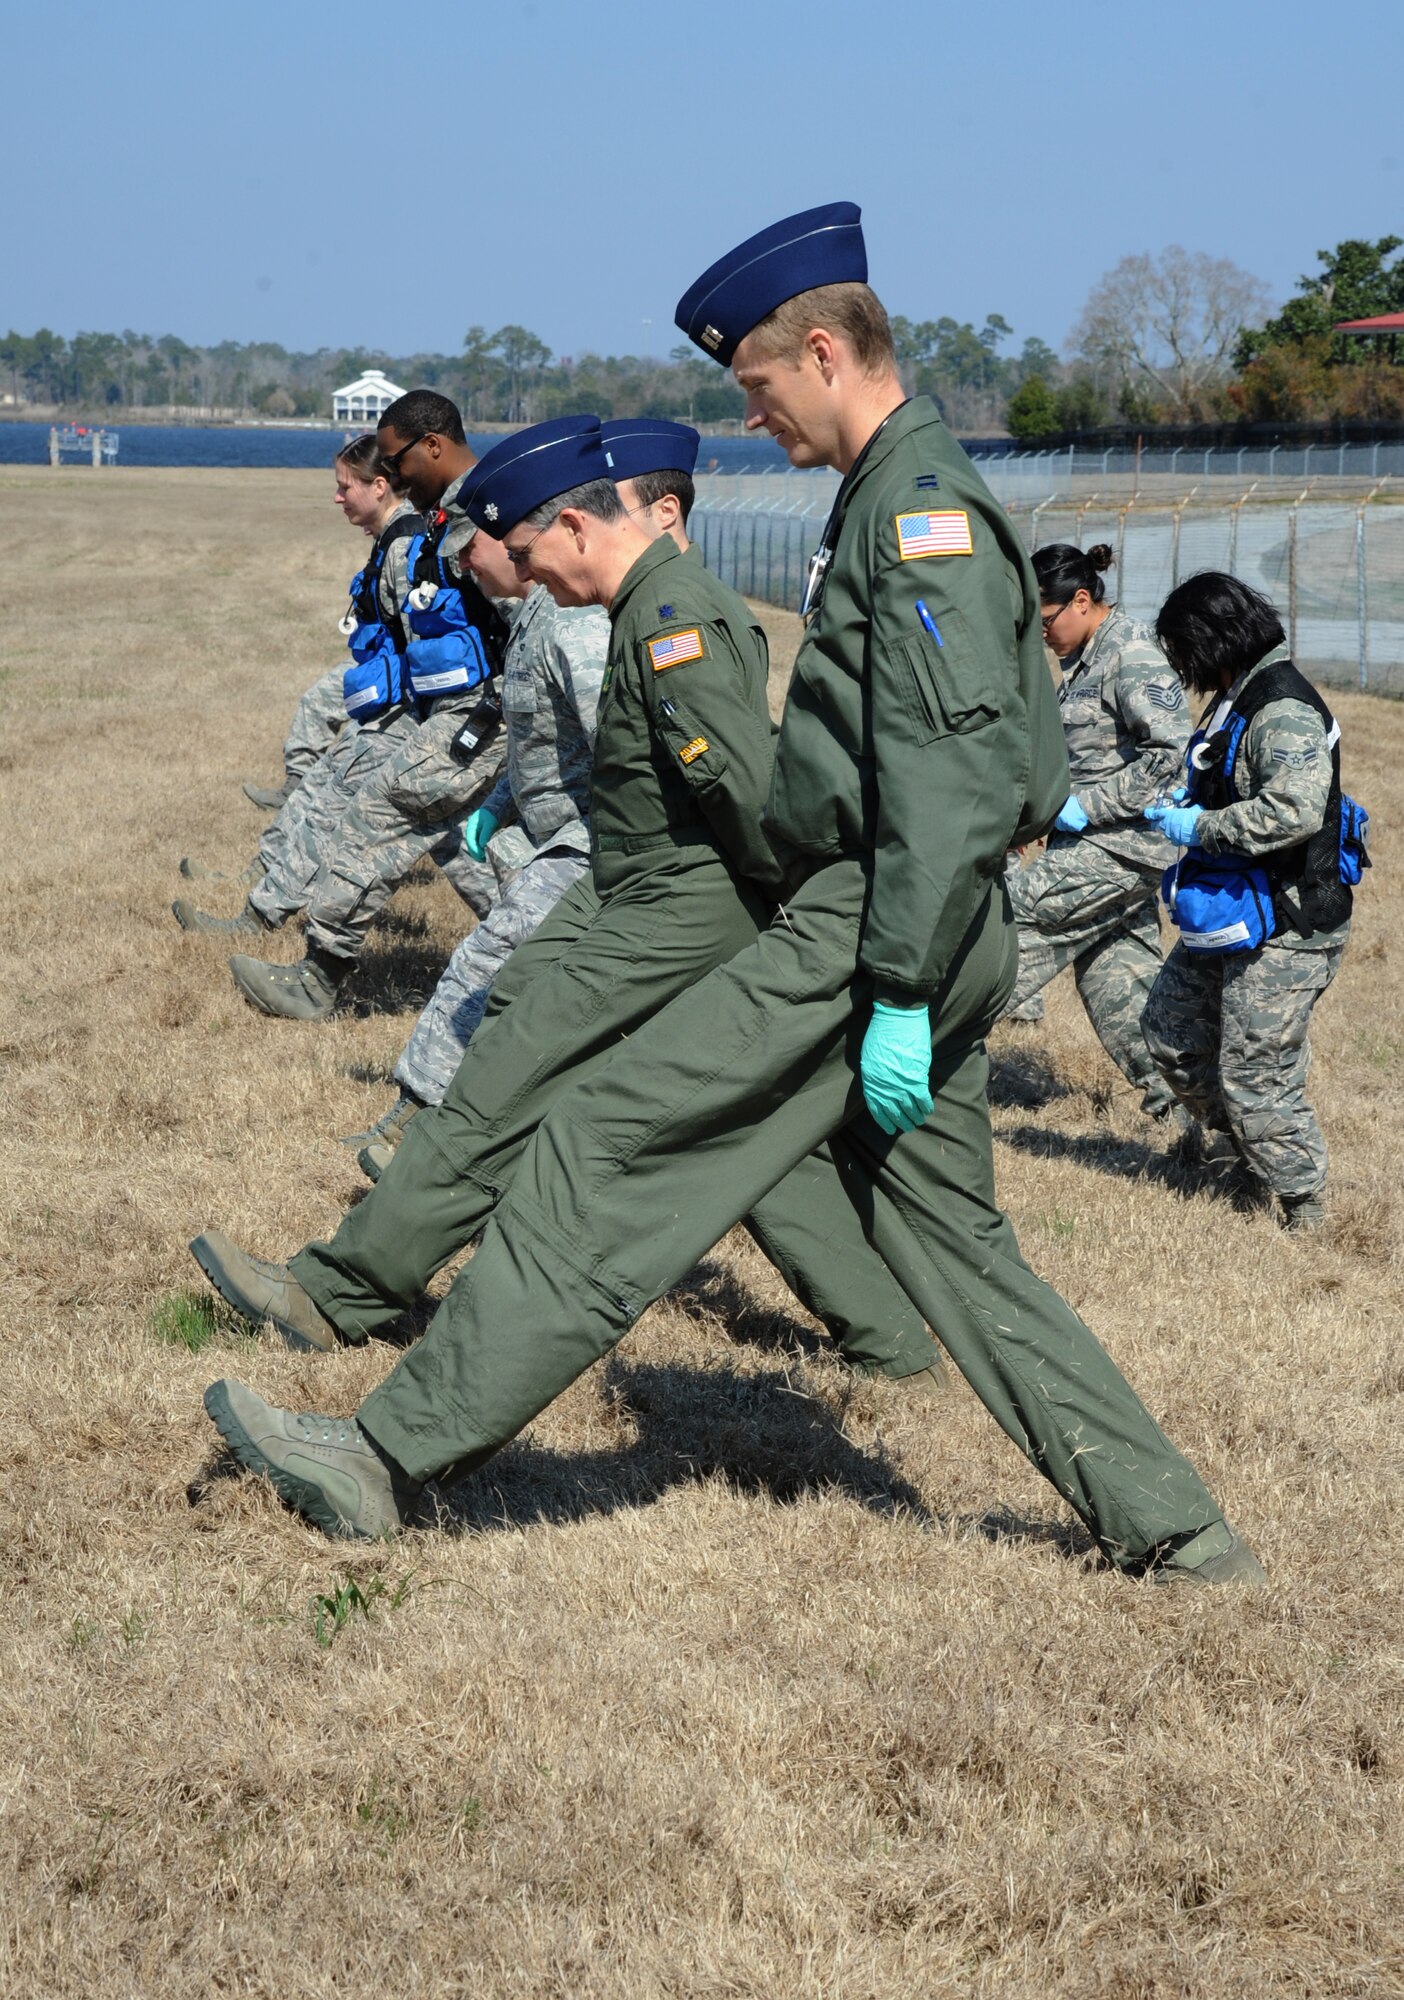 Capt. Chase Rogers, (front), and Lt. Col. Michael Coghlan, 81st Aerospace Medicine Squadron flight surgeons, assist the search and recovery team during a major accident response exercise Feb. 12, 2015, on the flight line, Keesler Air Force Base, Miss.  The MARE simulated a C-130J Hercules aircraft crash on base. The exercise was held to test the readiness of Keesler personnel during a major accident.  (U.S. Air Force photo by Kemberly Groue)